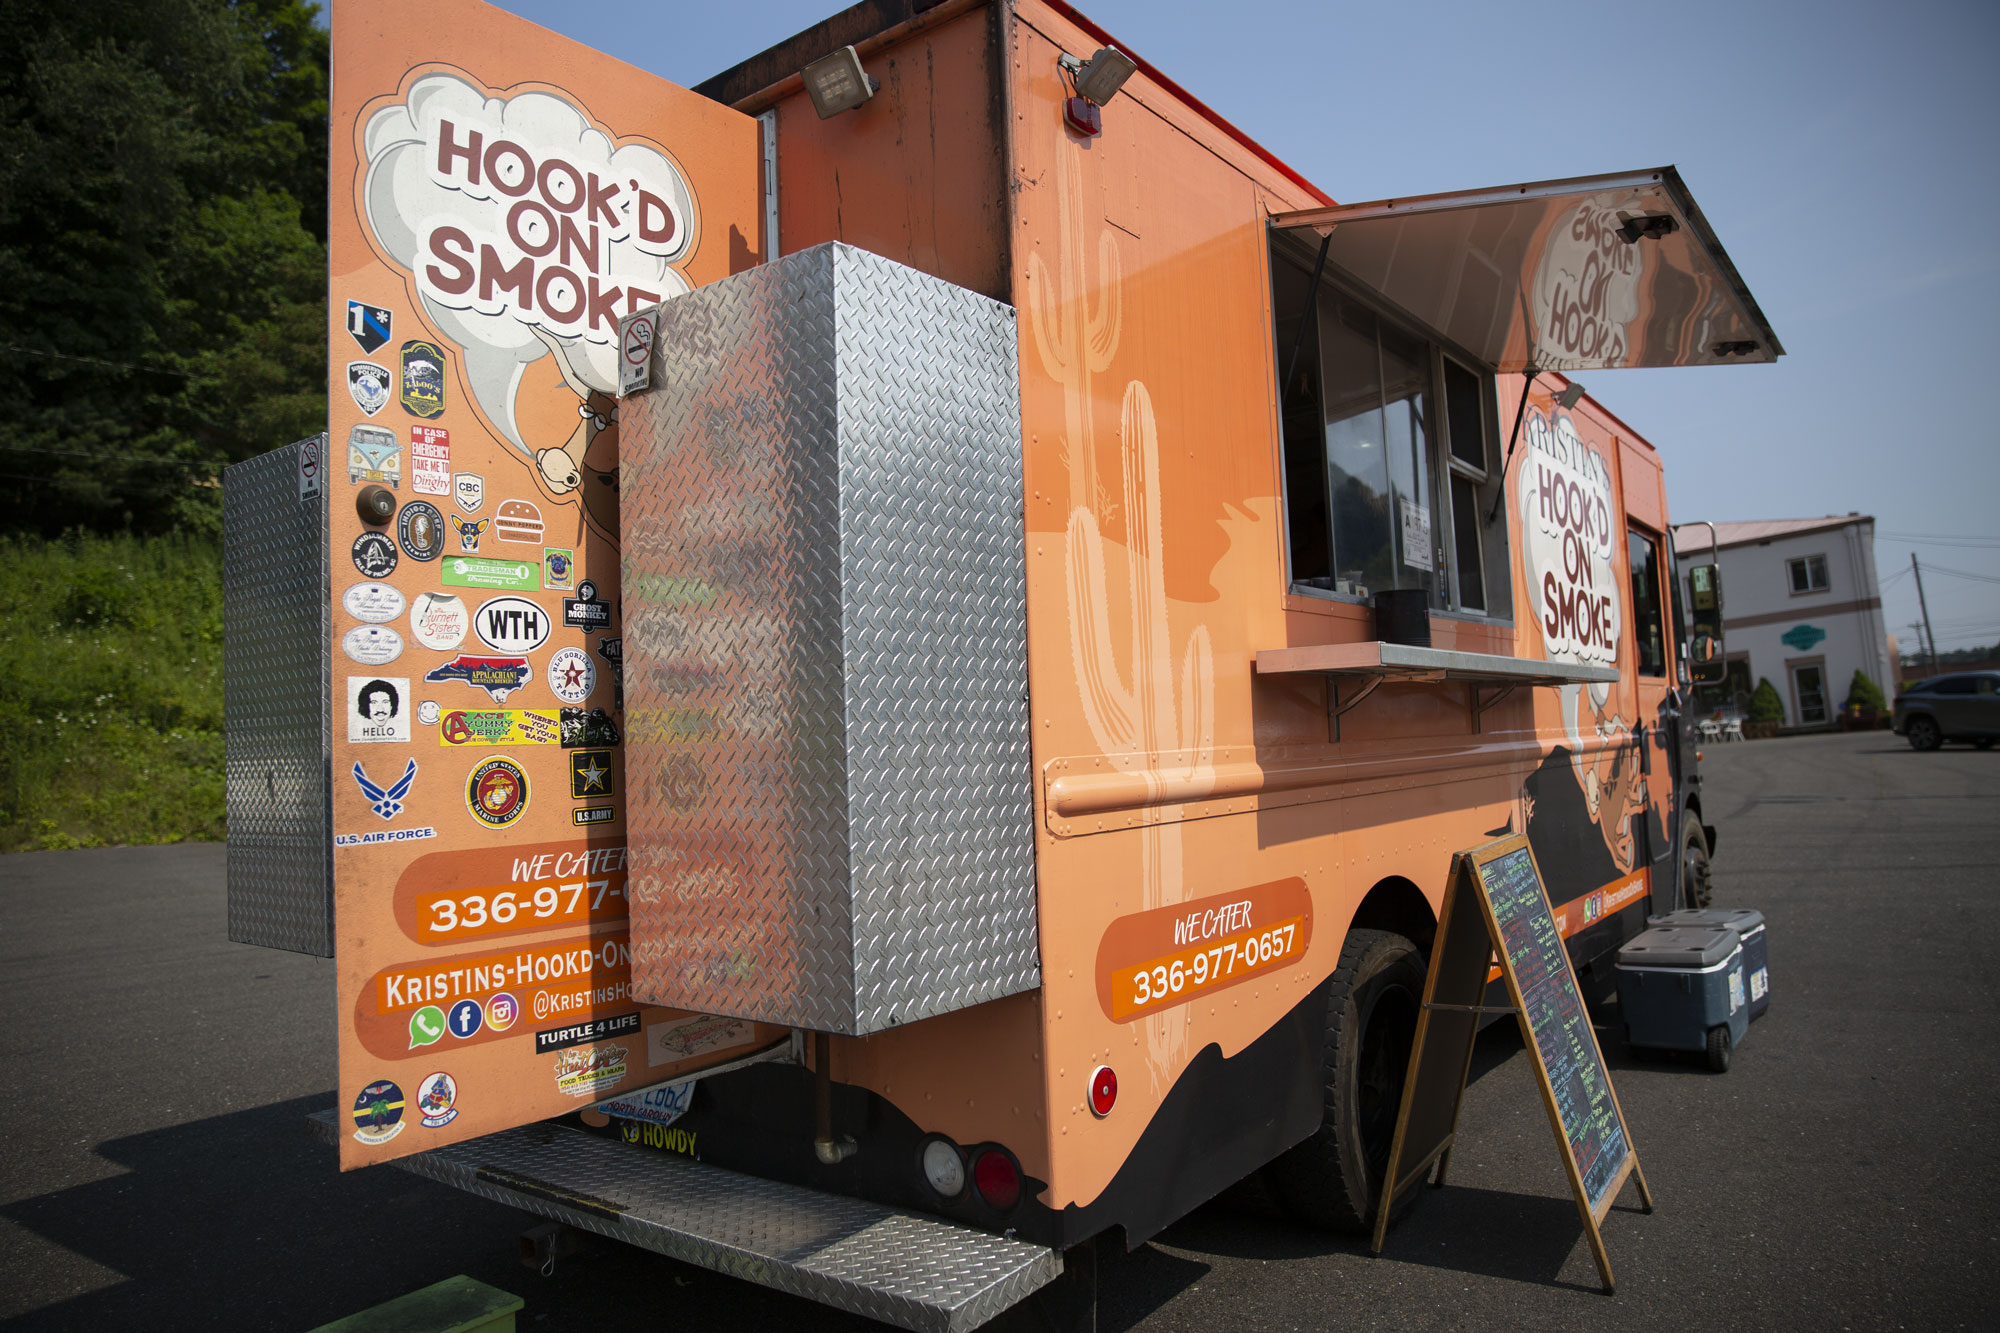 An orange food truck called "Hook'd on Smoke" stands open and ready for business